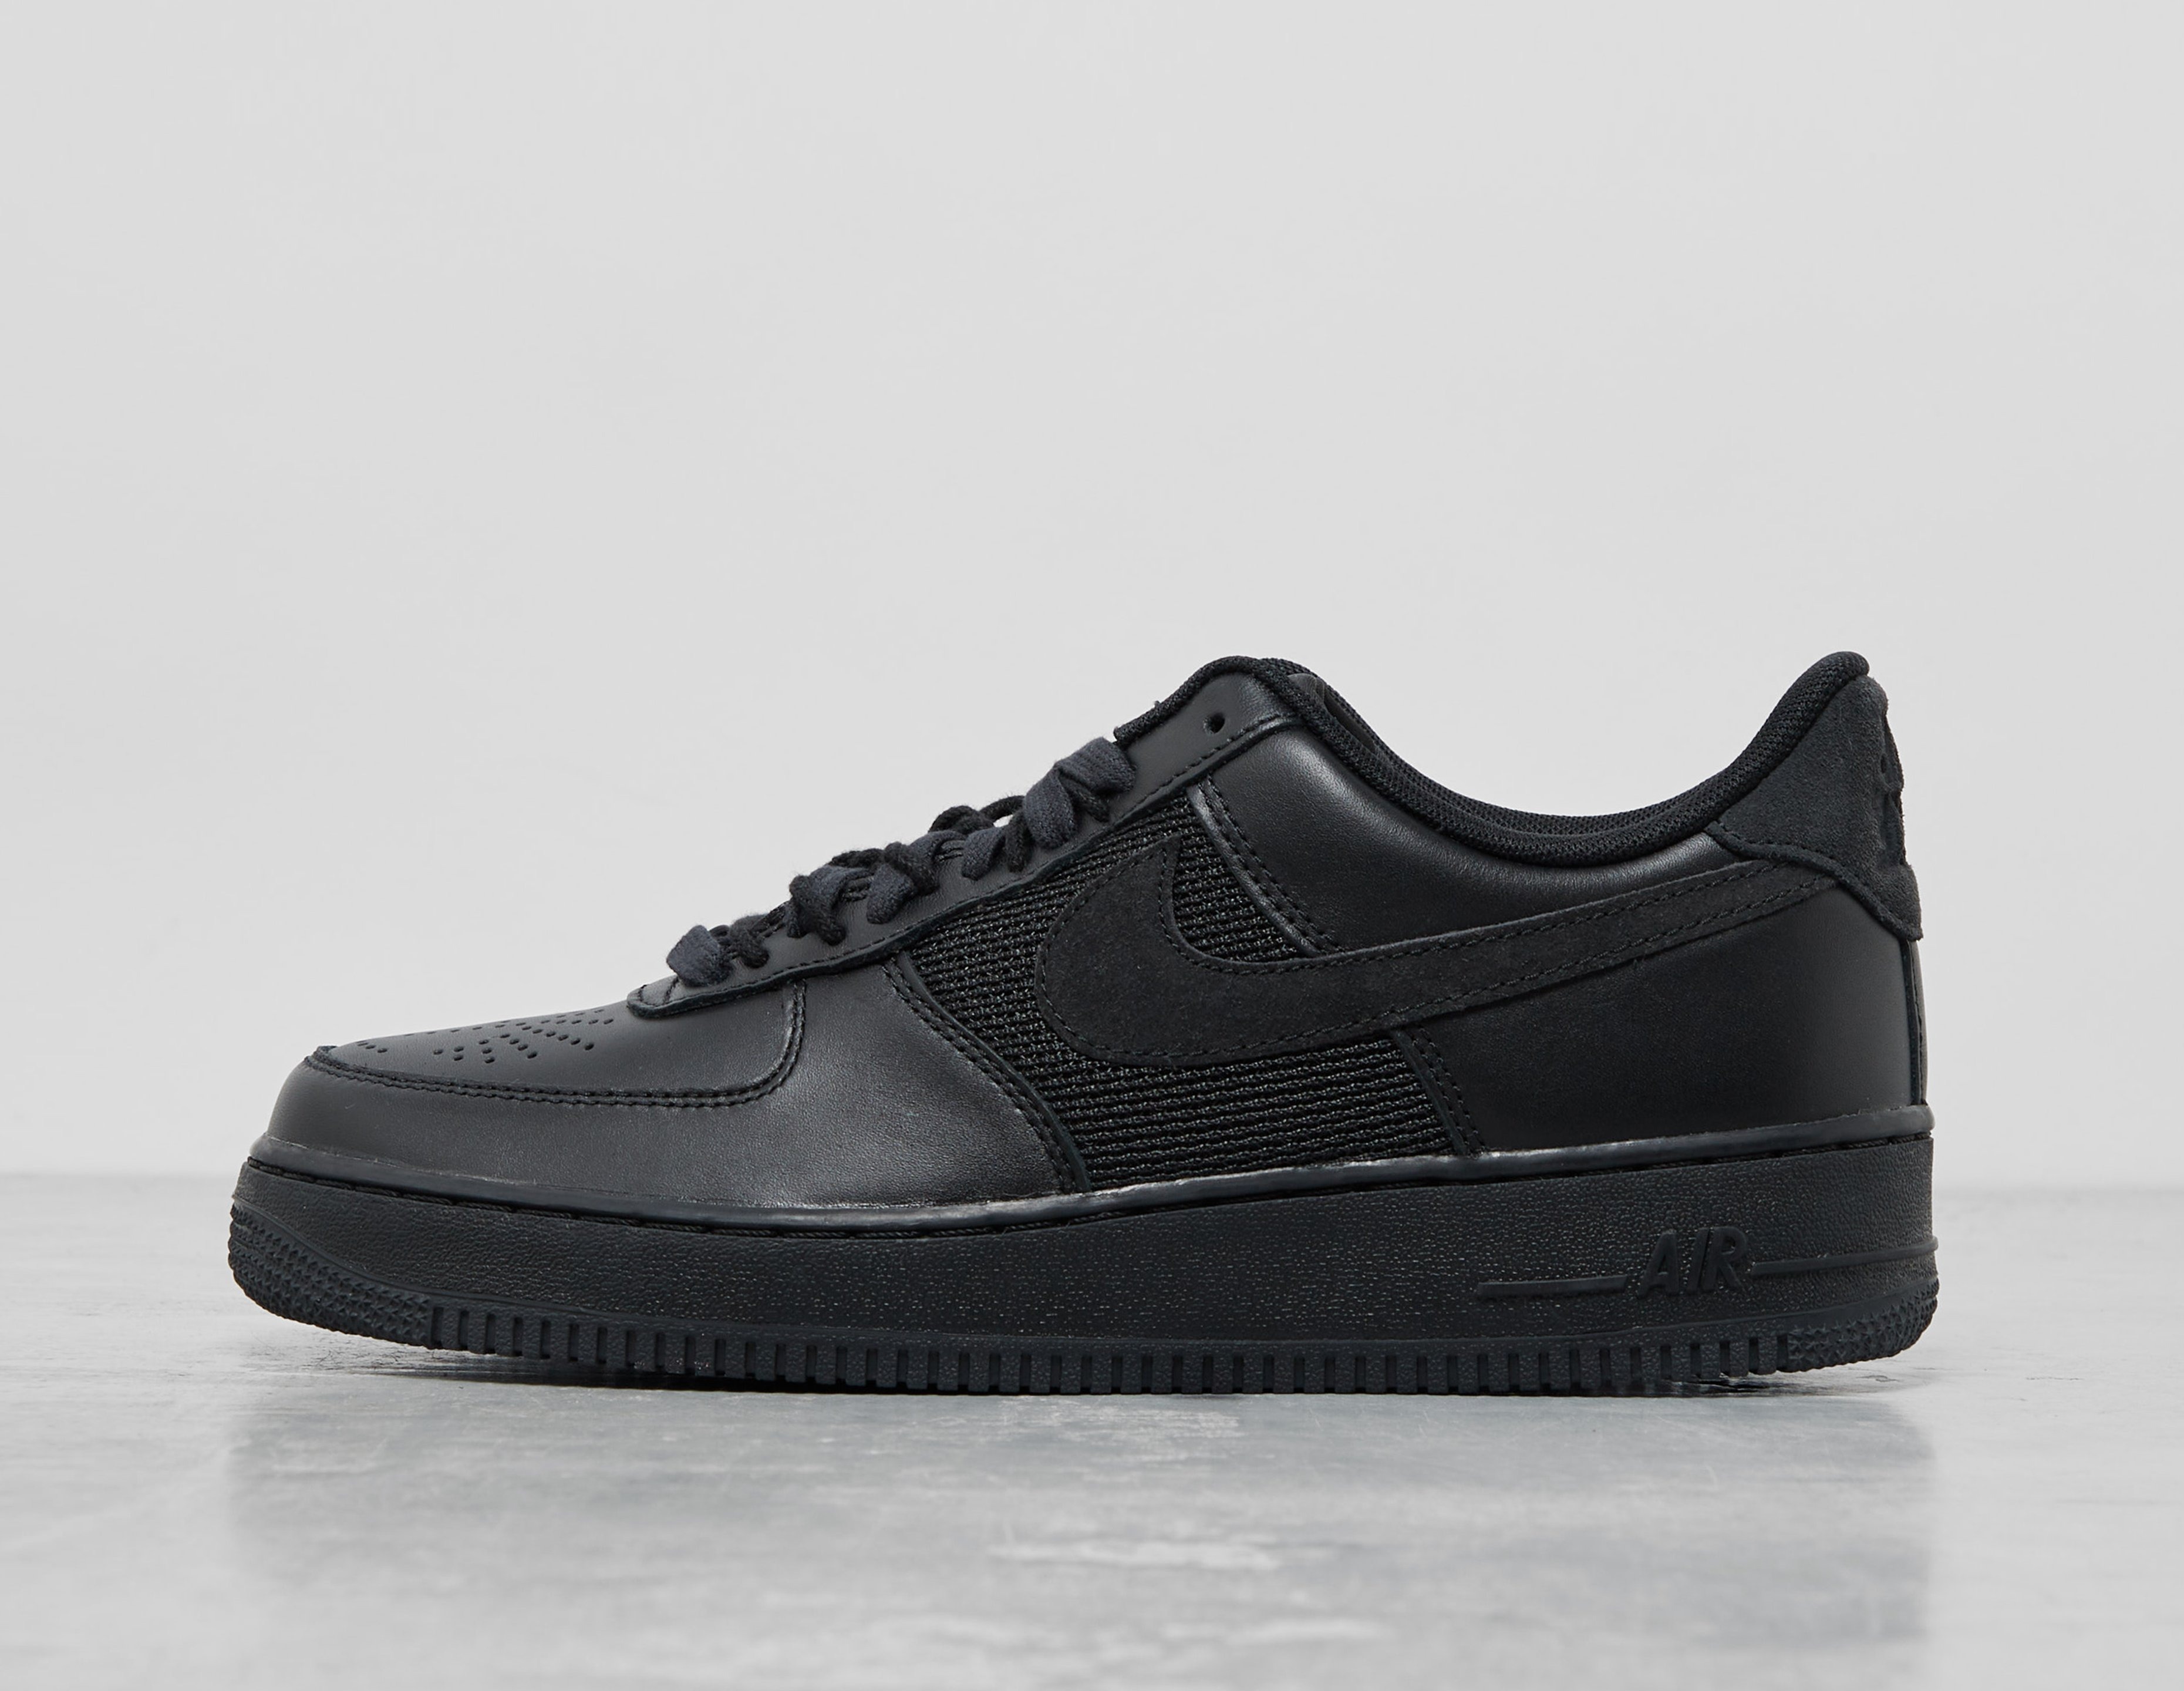 Nike Air Force 1 '07 LV8 2 Mens sizes: 8-13 Available now in store